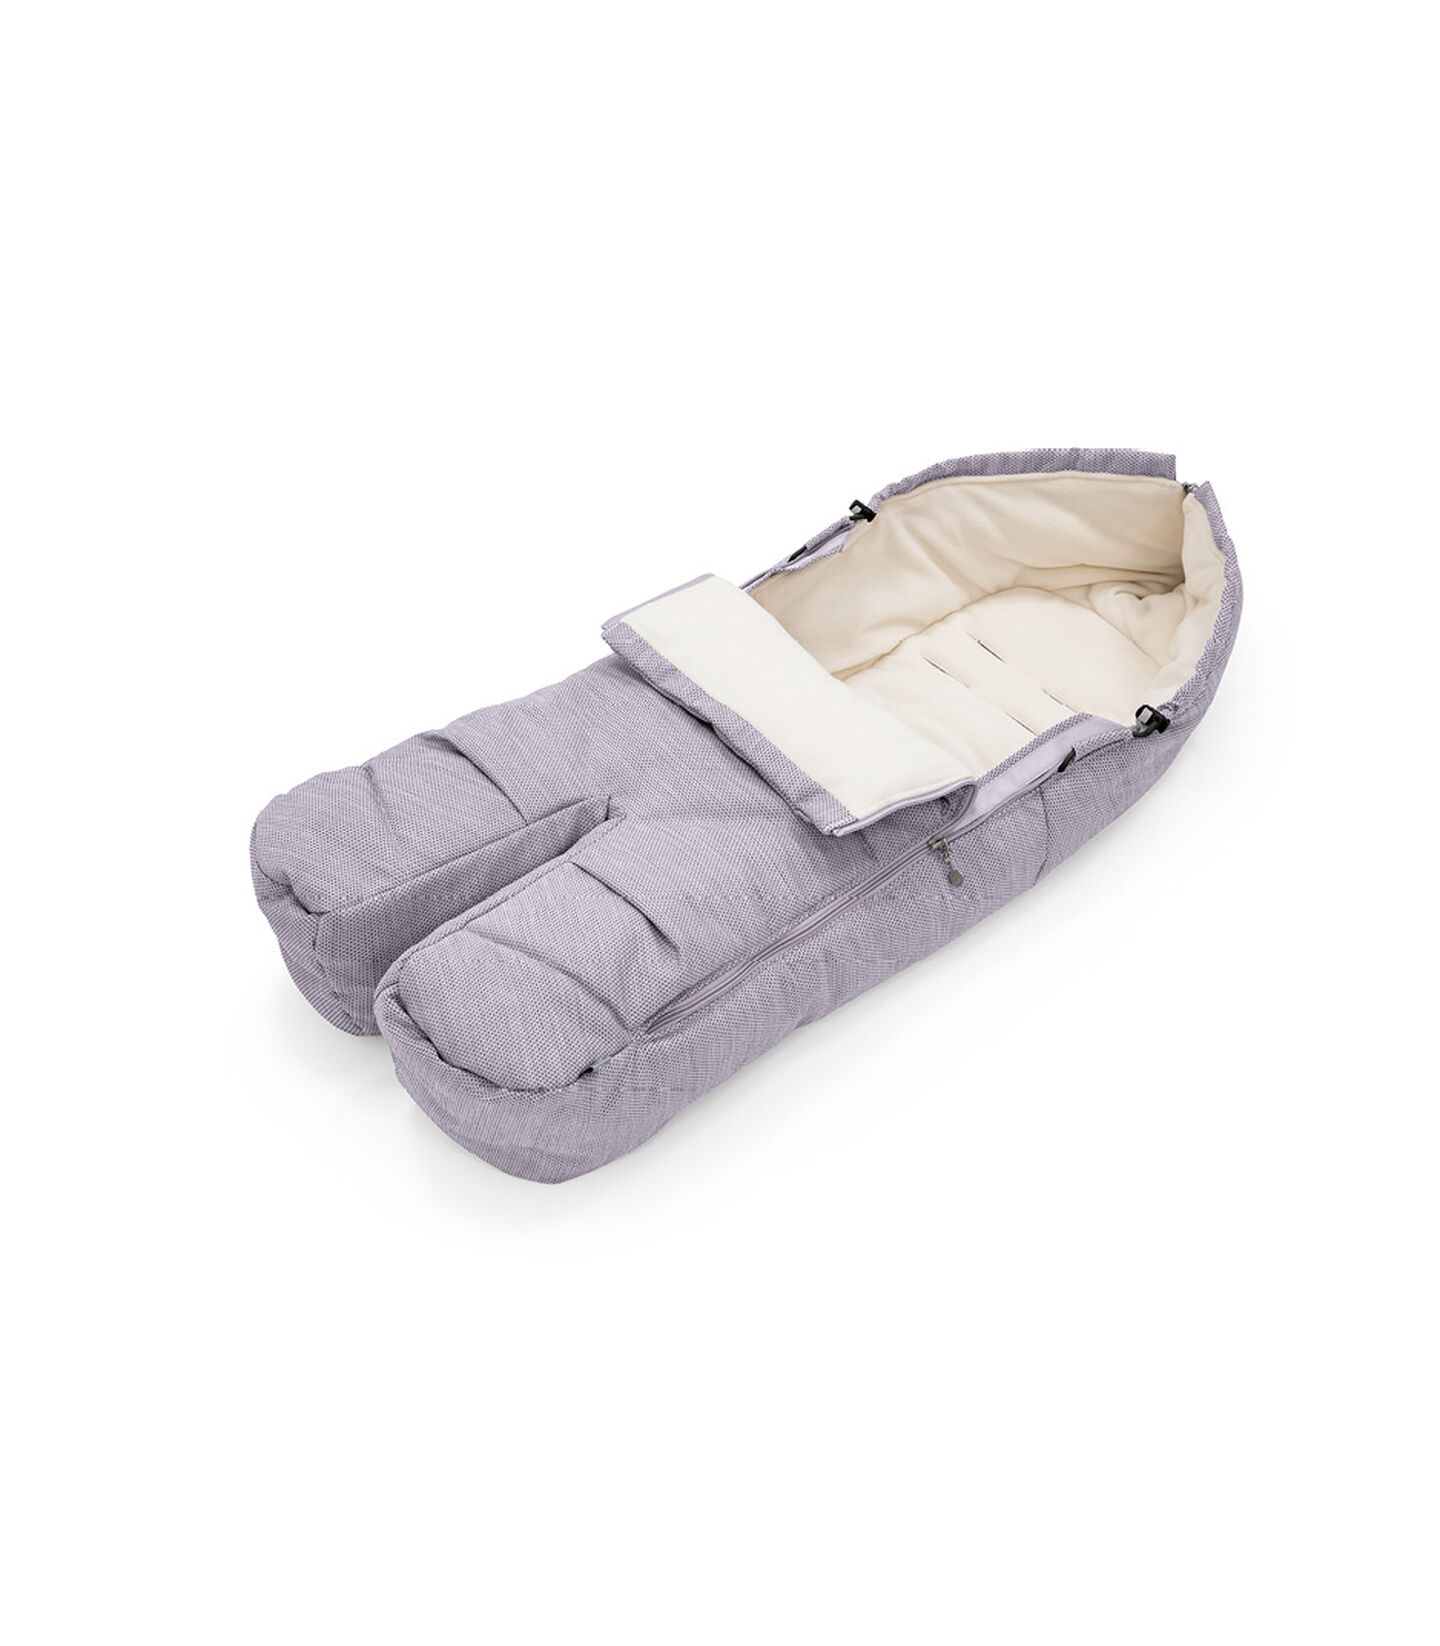 Stokke® Foot Muff Brushed Lilac, Lila brossé, mainview view 1